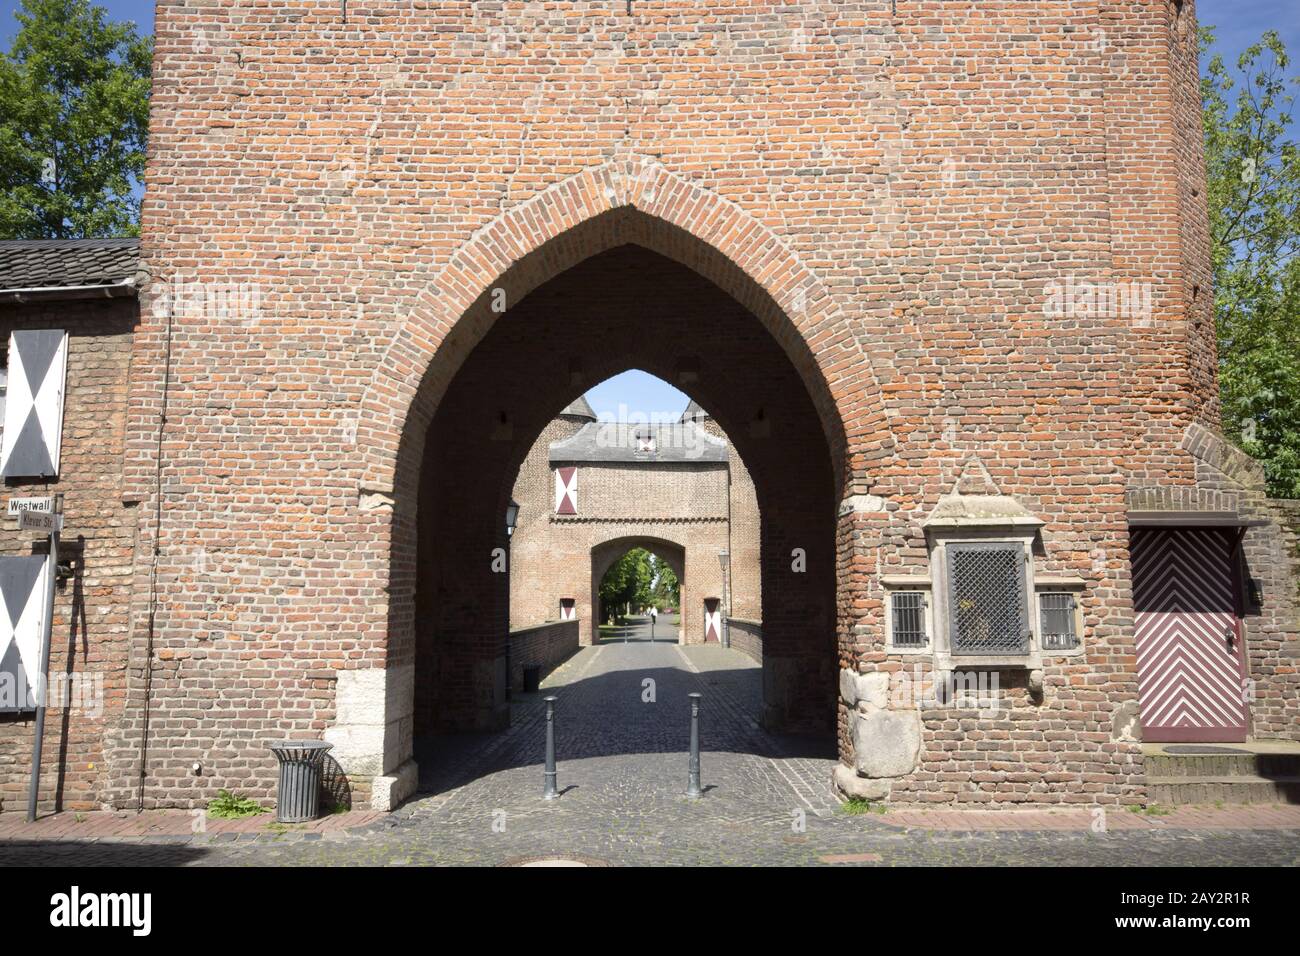 Klever Tor in Xanten, town fortification, Germany Stock Photo